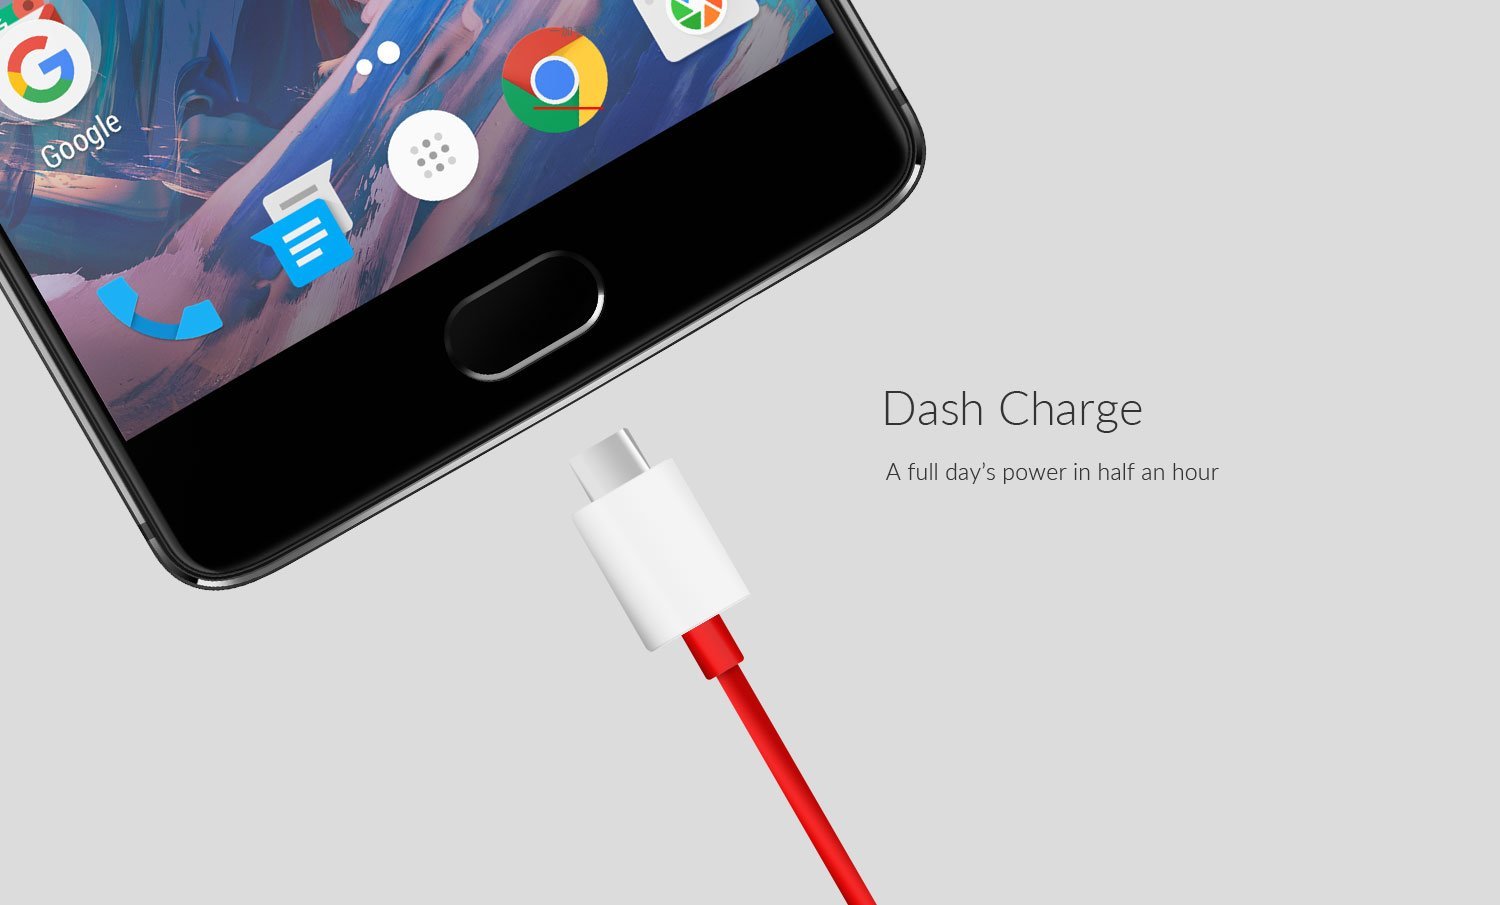 Oneplus 3 Dash Charge